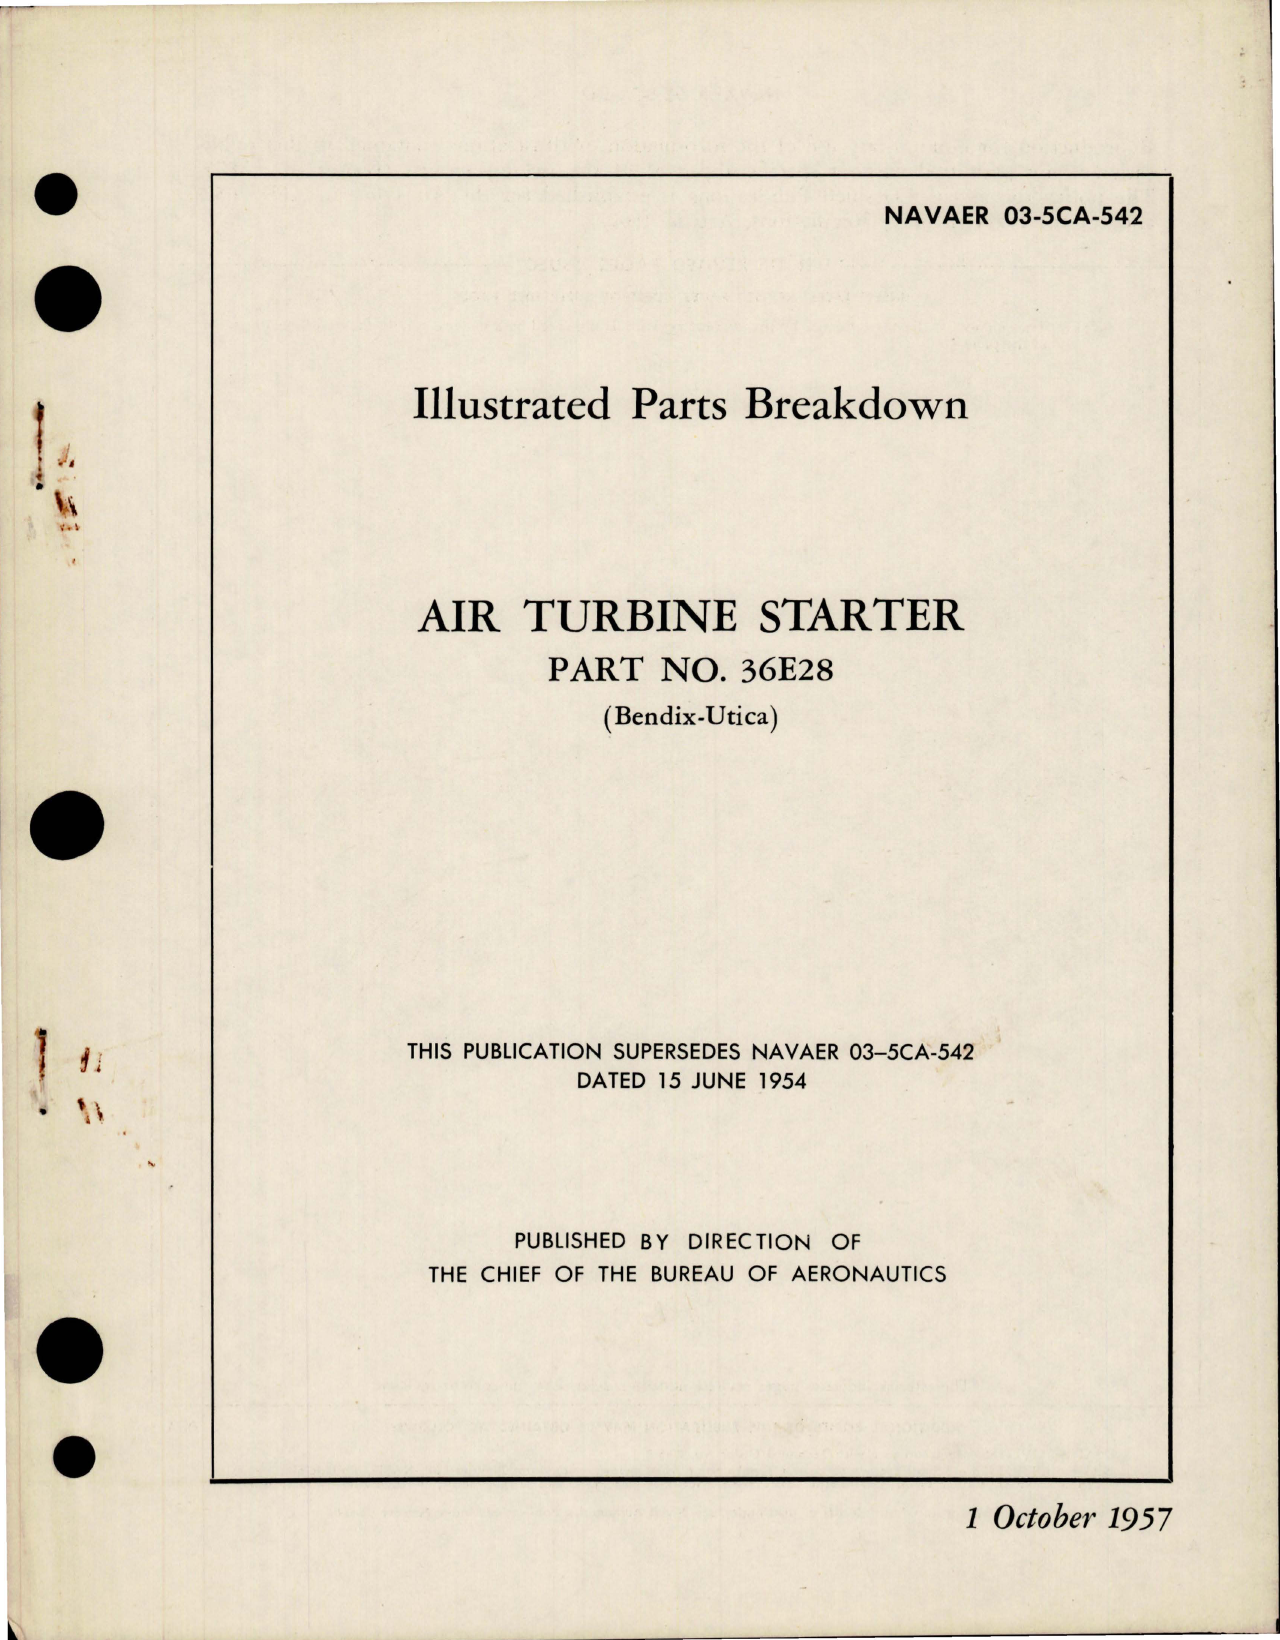 Sample page 1 from AirCorps Library document: Illustrated Parts Breakdown for Air Turbine Starter - Part 36E28 